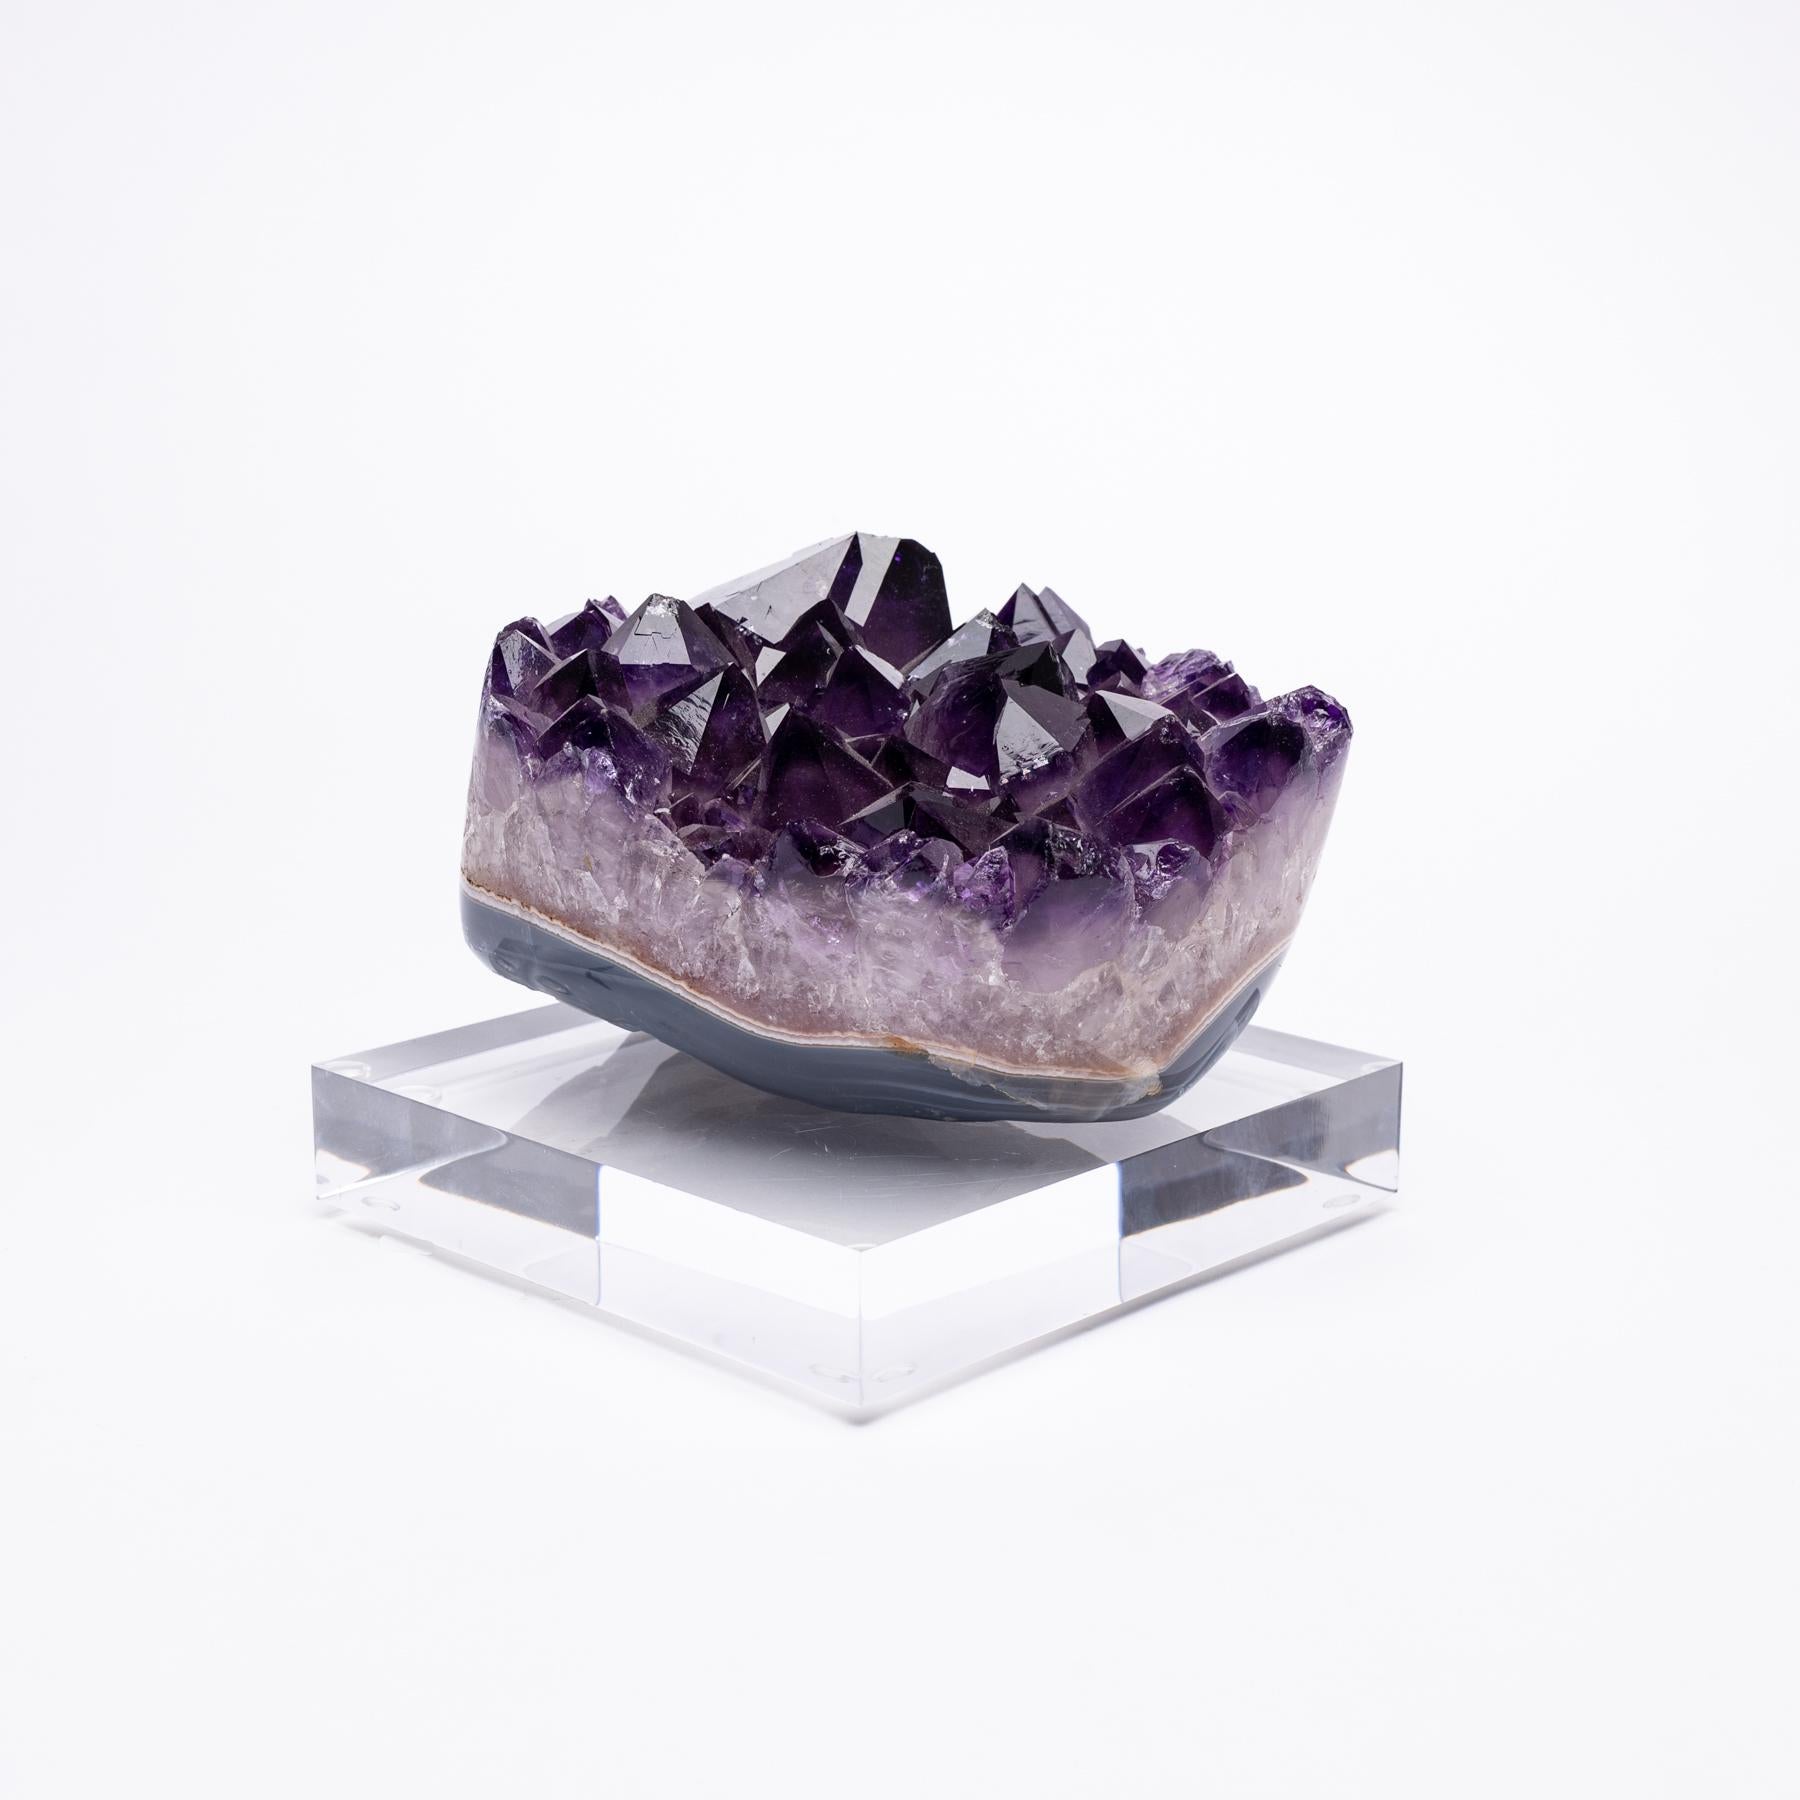 Origen: Uruguay
Colors: Blue, white and purple
Agates are formed in rounded nodules, which are sliced open to bring out the internal pattern hidden in the stone. Their formation is commonly from depositions of layers of silica filling voids in